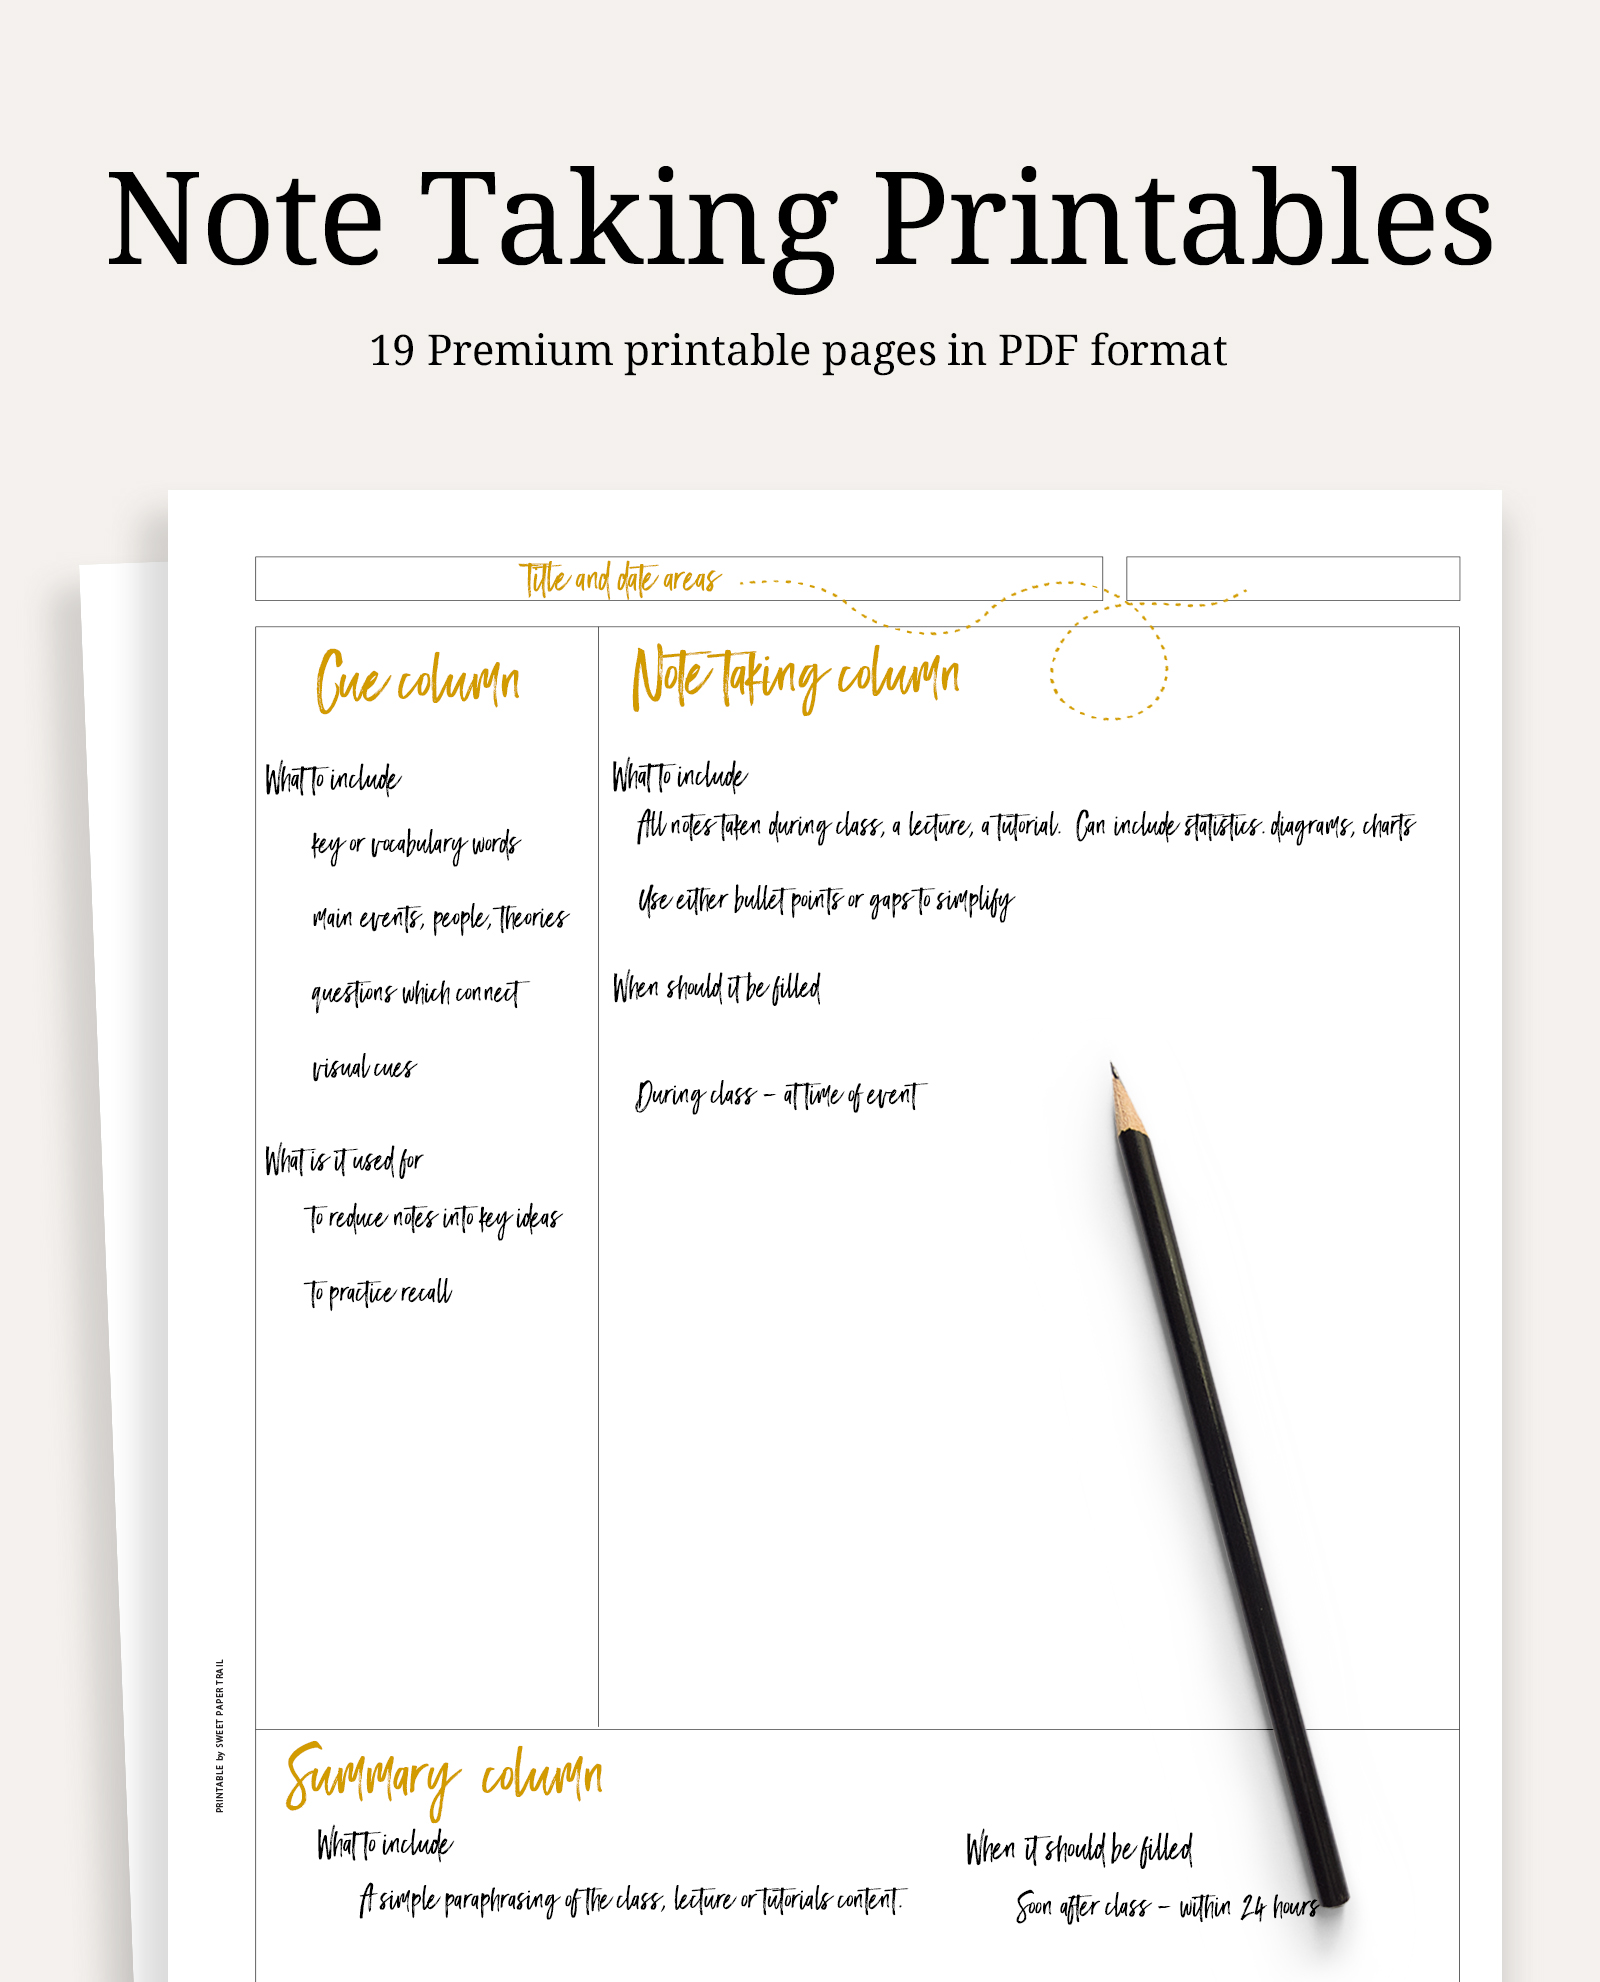 https://www.sweetpapertrail.com/wp-content/uploads/2020/09/note.taking.printables.jpg